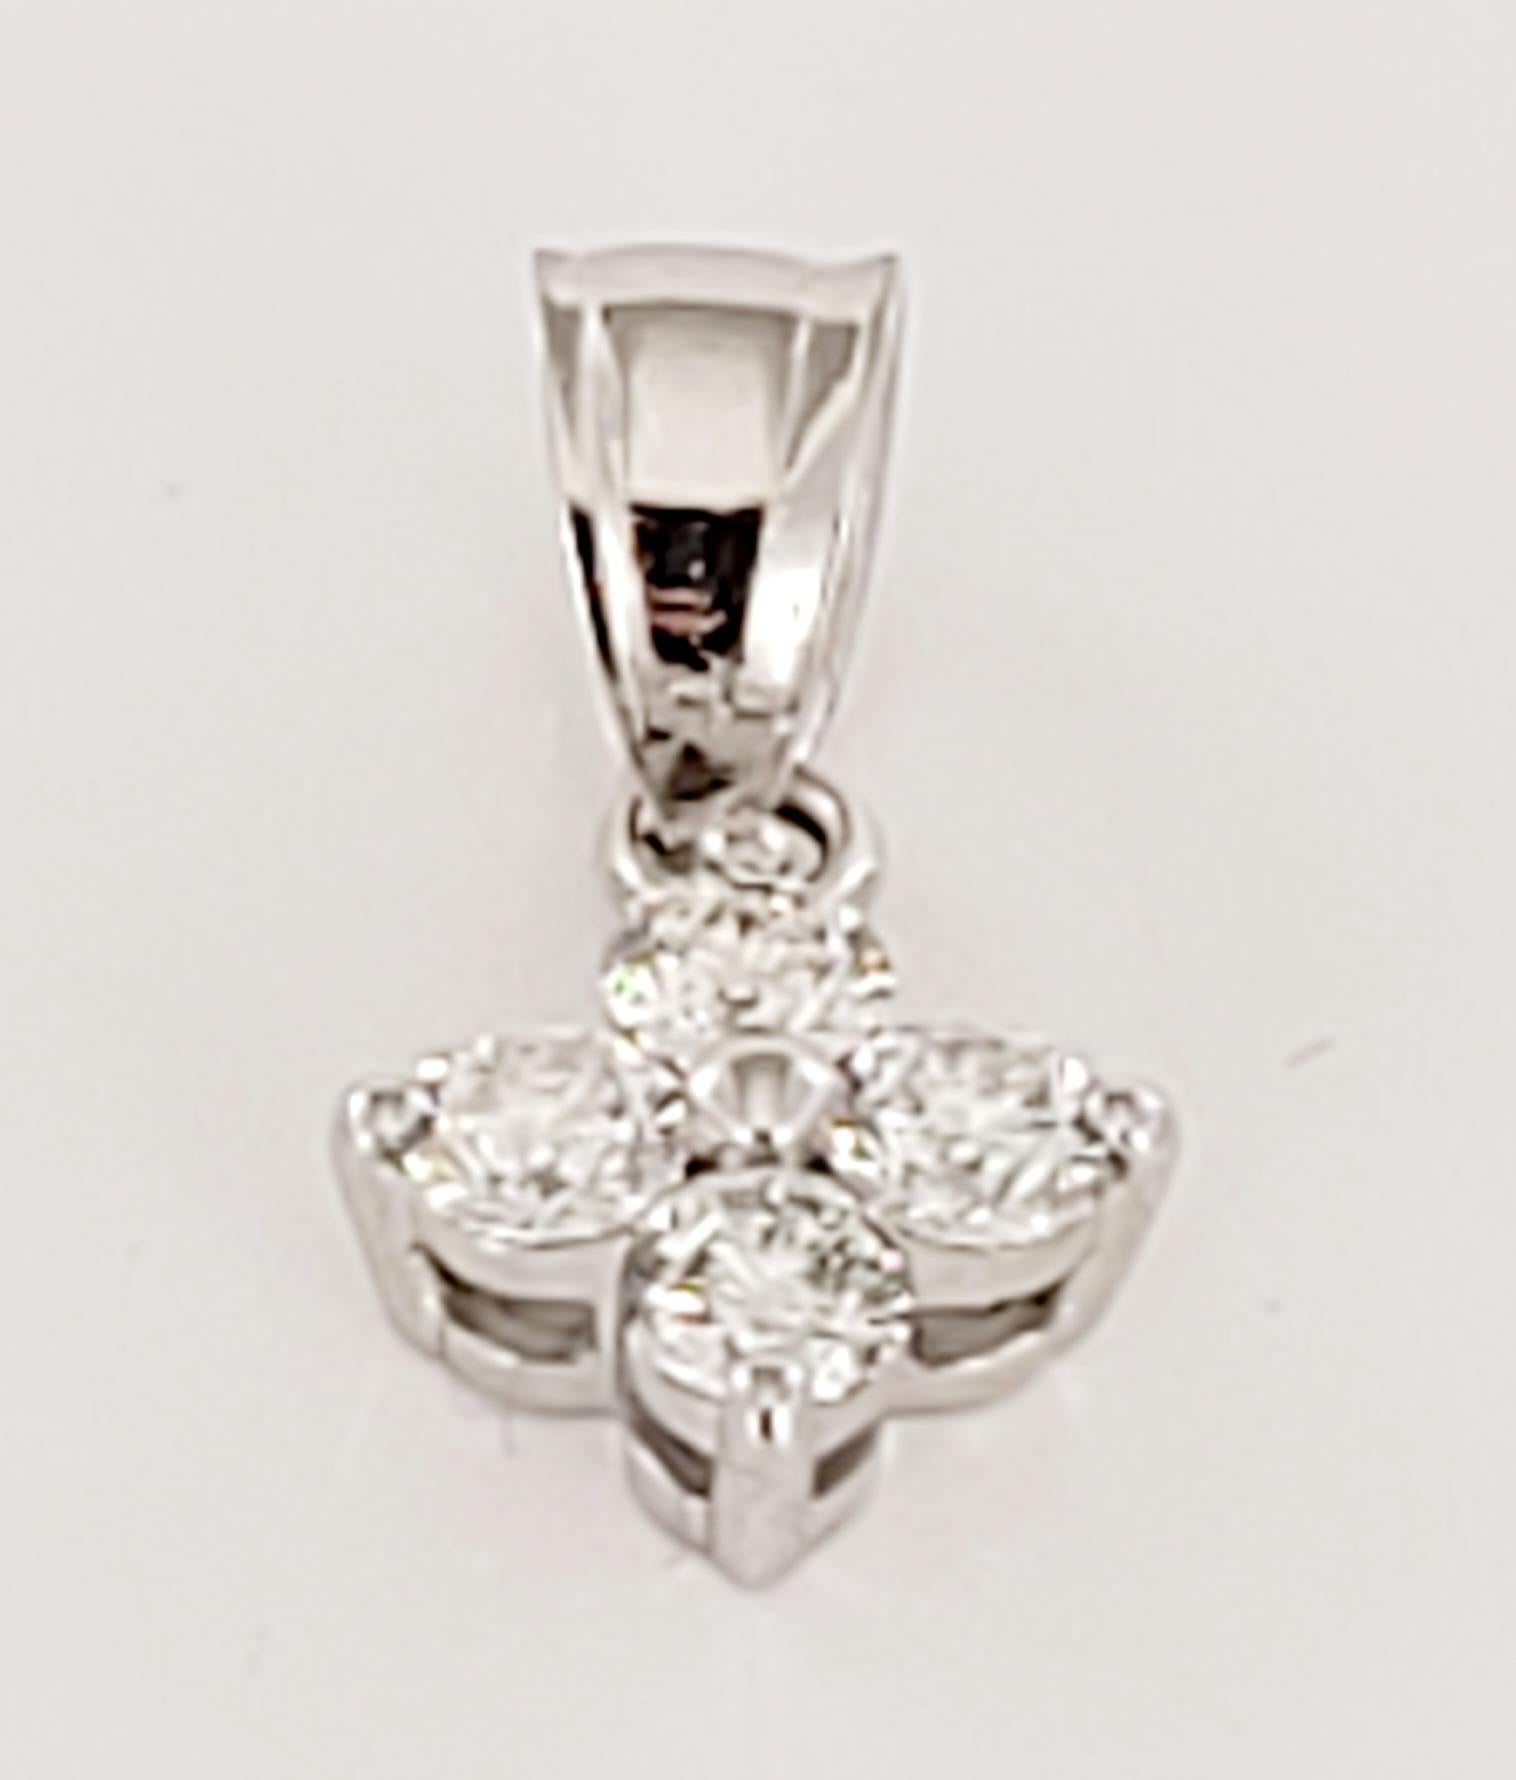 Flower Shape Pendant
14K White Gold
Diamonds .45ct
Diamond Clarity VS 
Color Grade G
Condition New, without tags  
Retail Price:$700